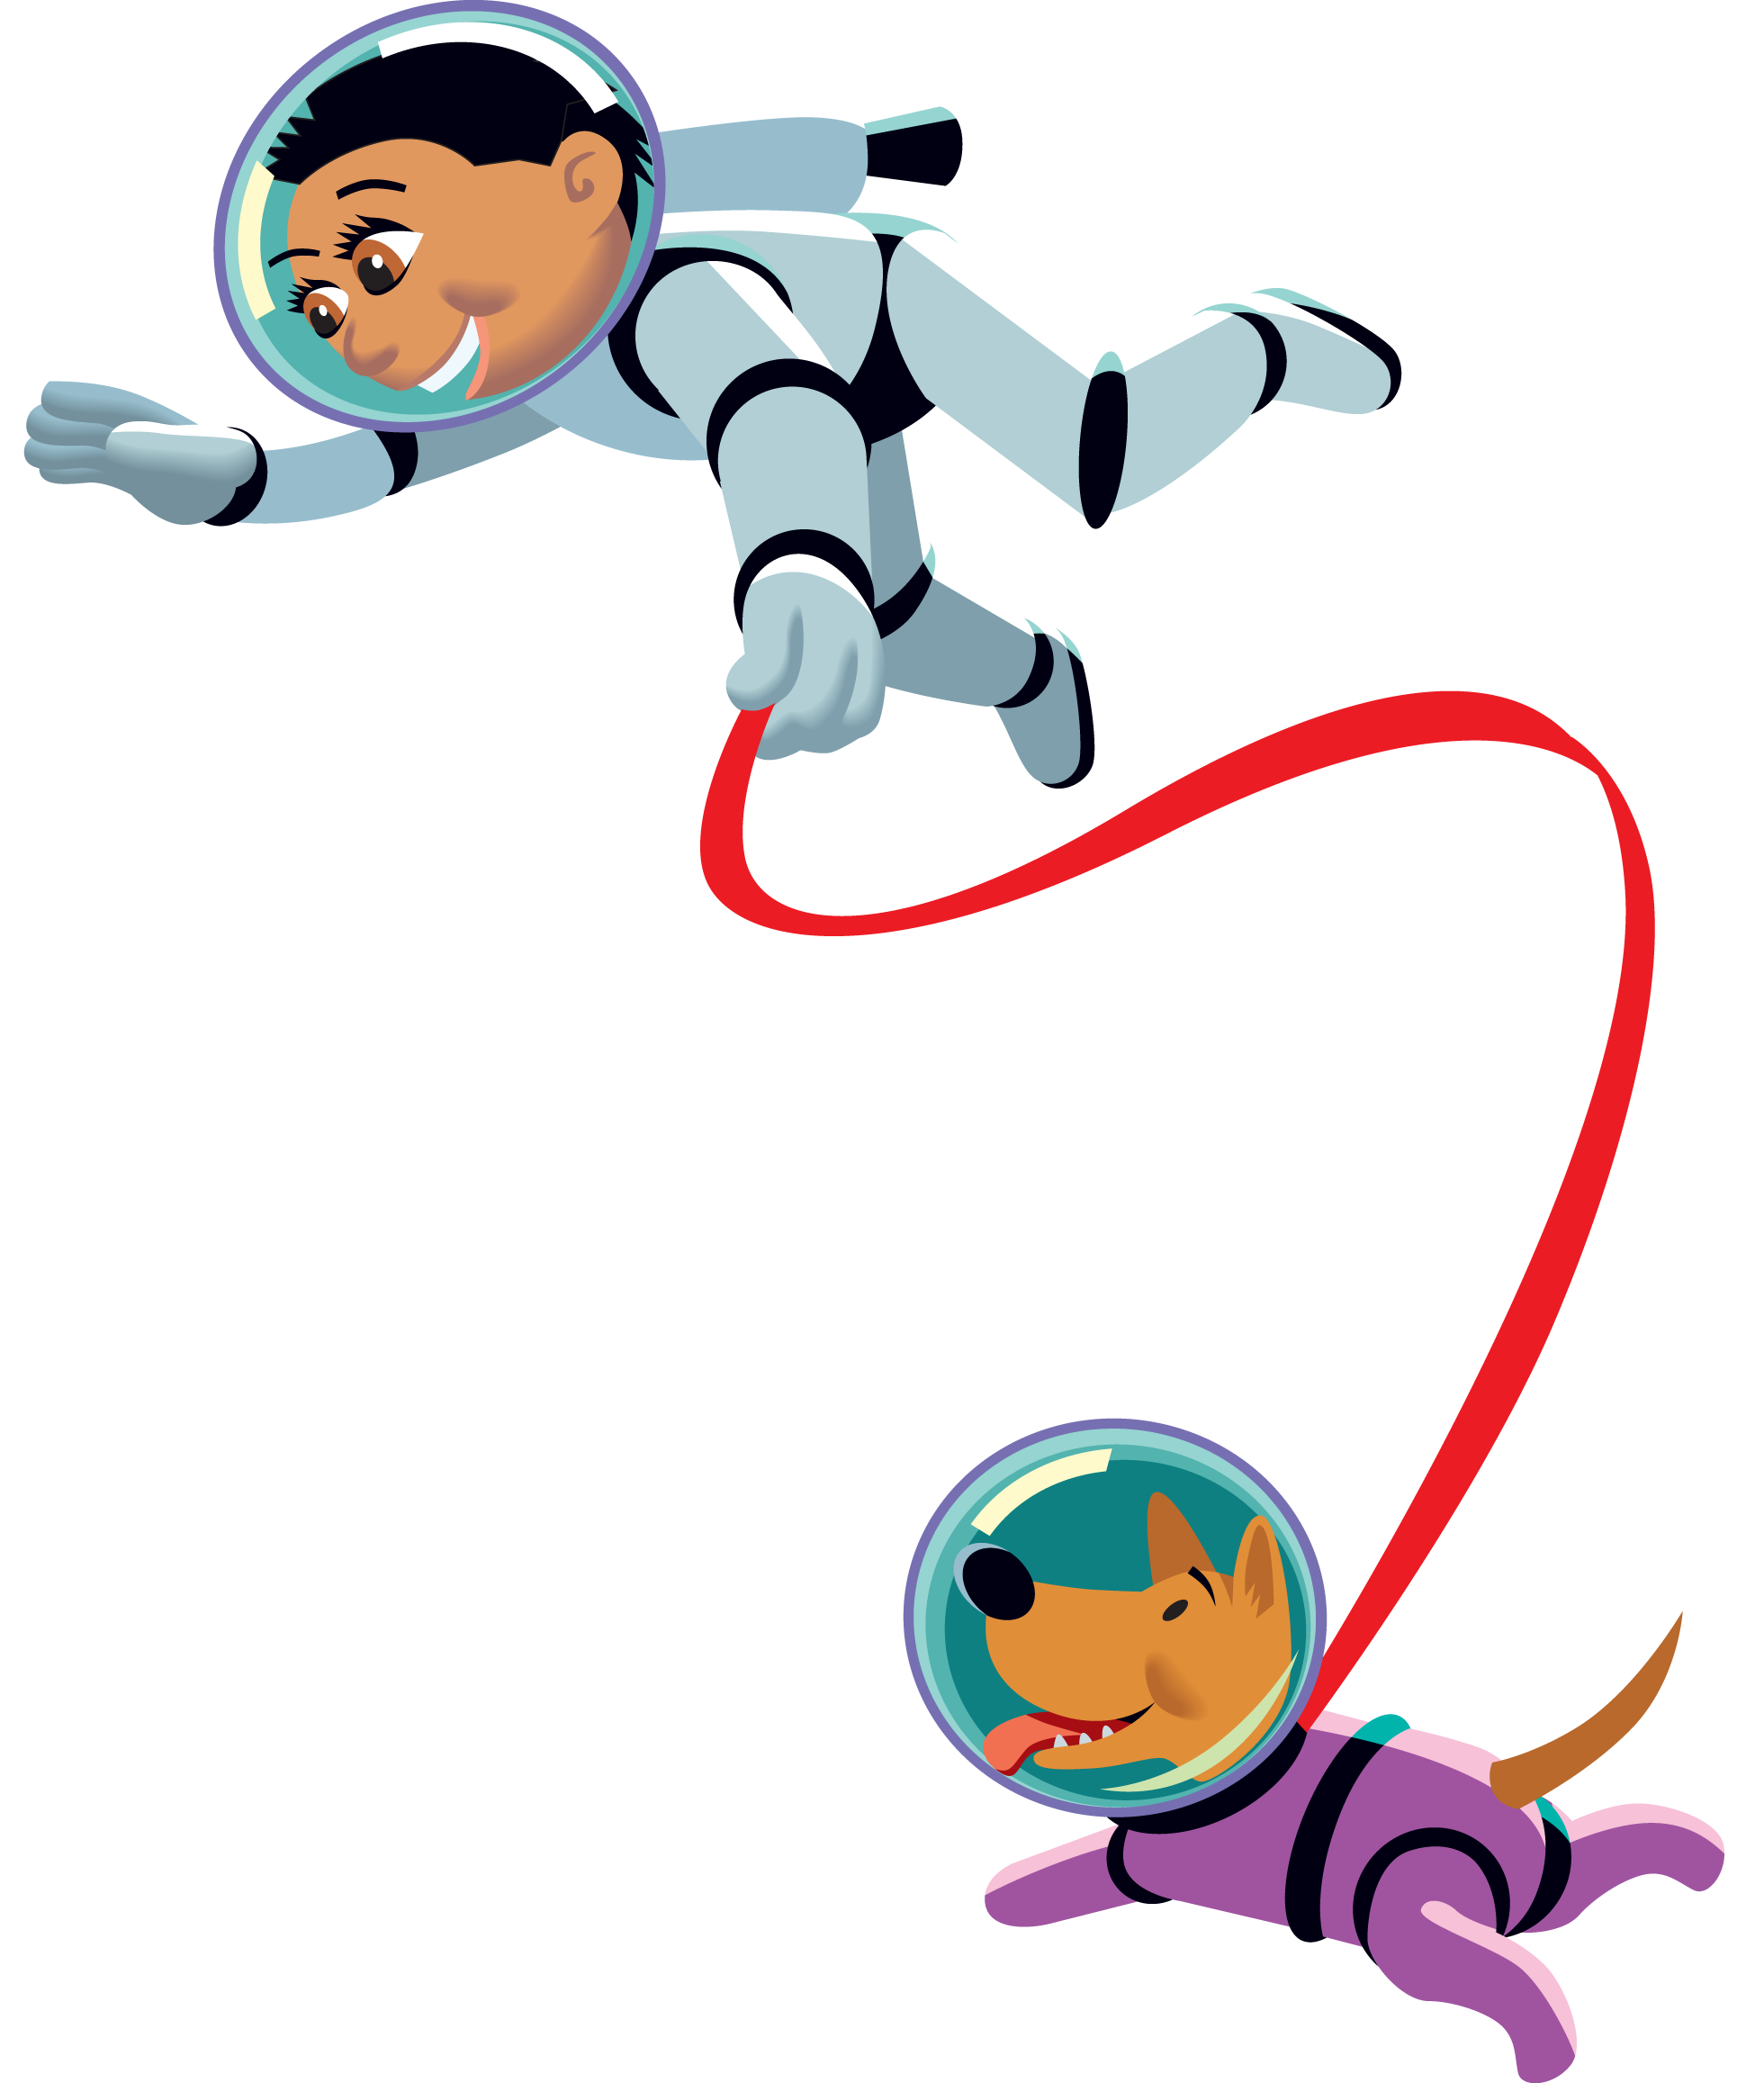 Astronaut Pictures For Kids - Cliparts.co